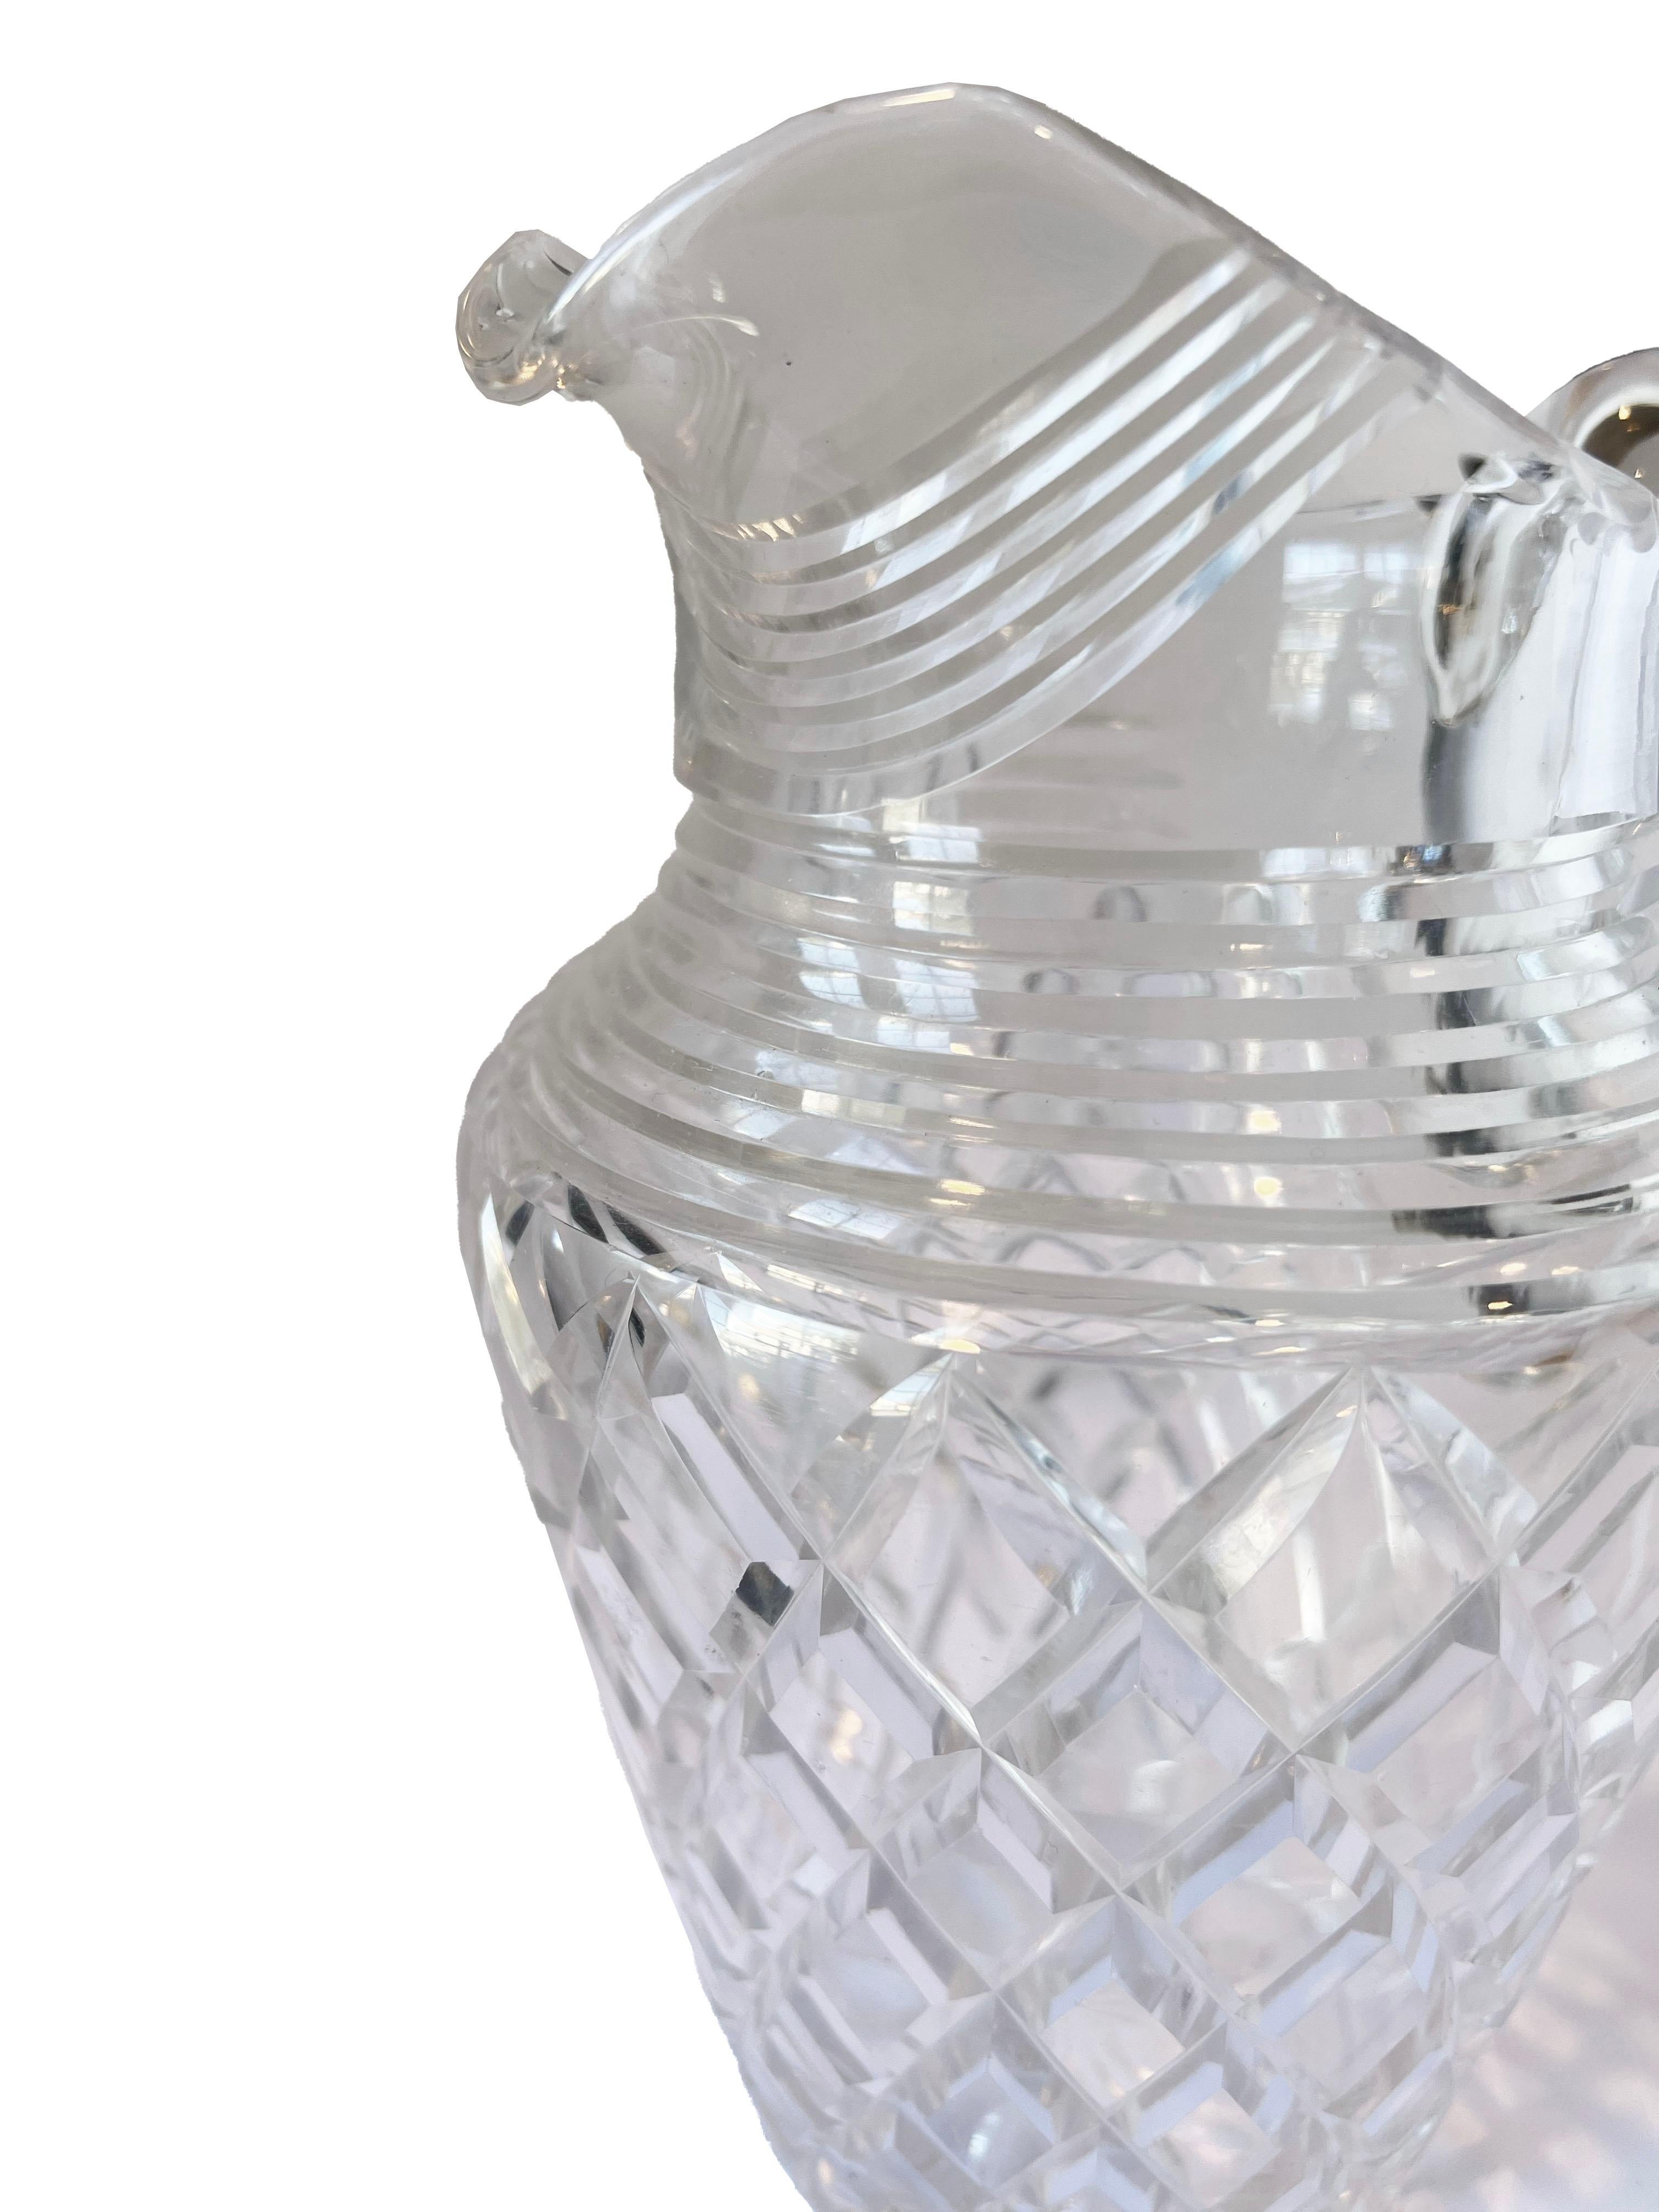 Faceted Crystal Pitcher from Andre Leon Talley's Private Collection In Good Condition For Sale In Scottsdale, AZ